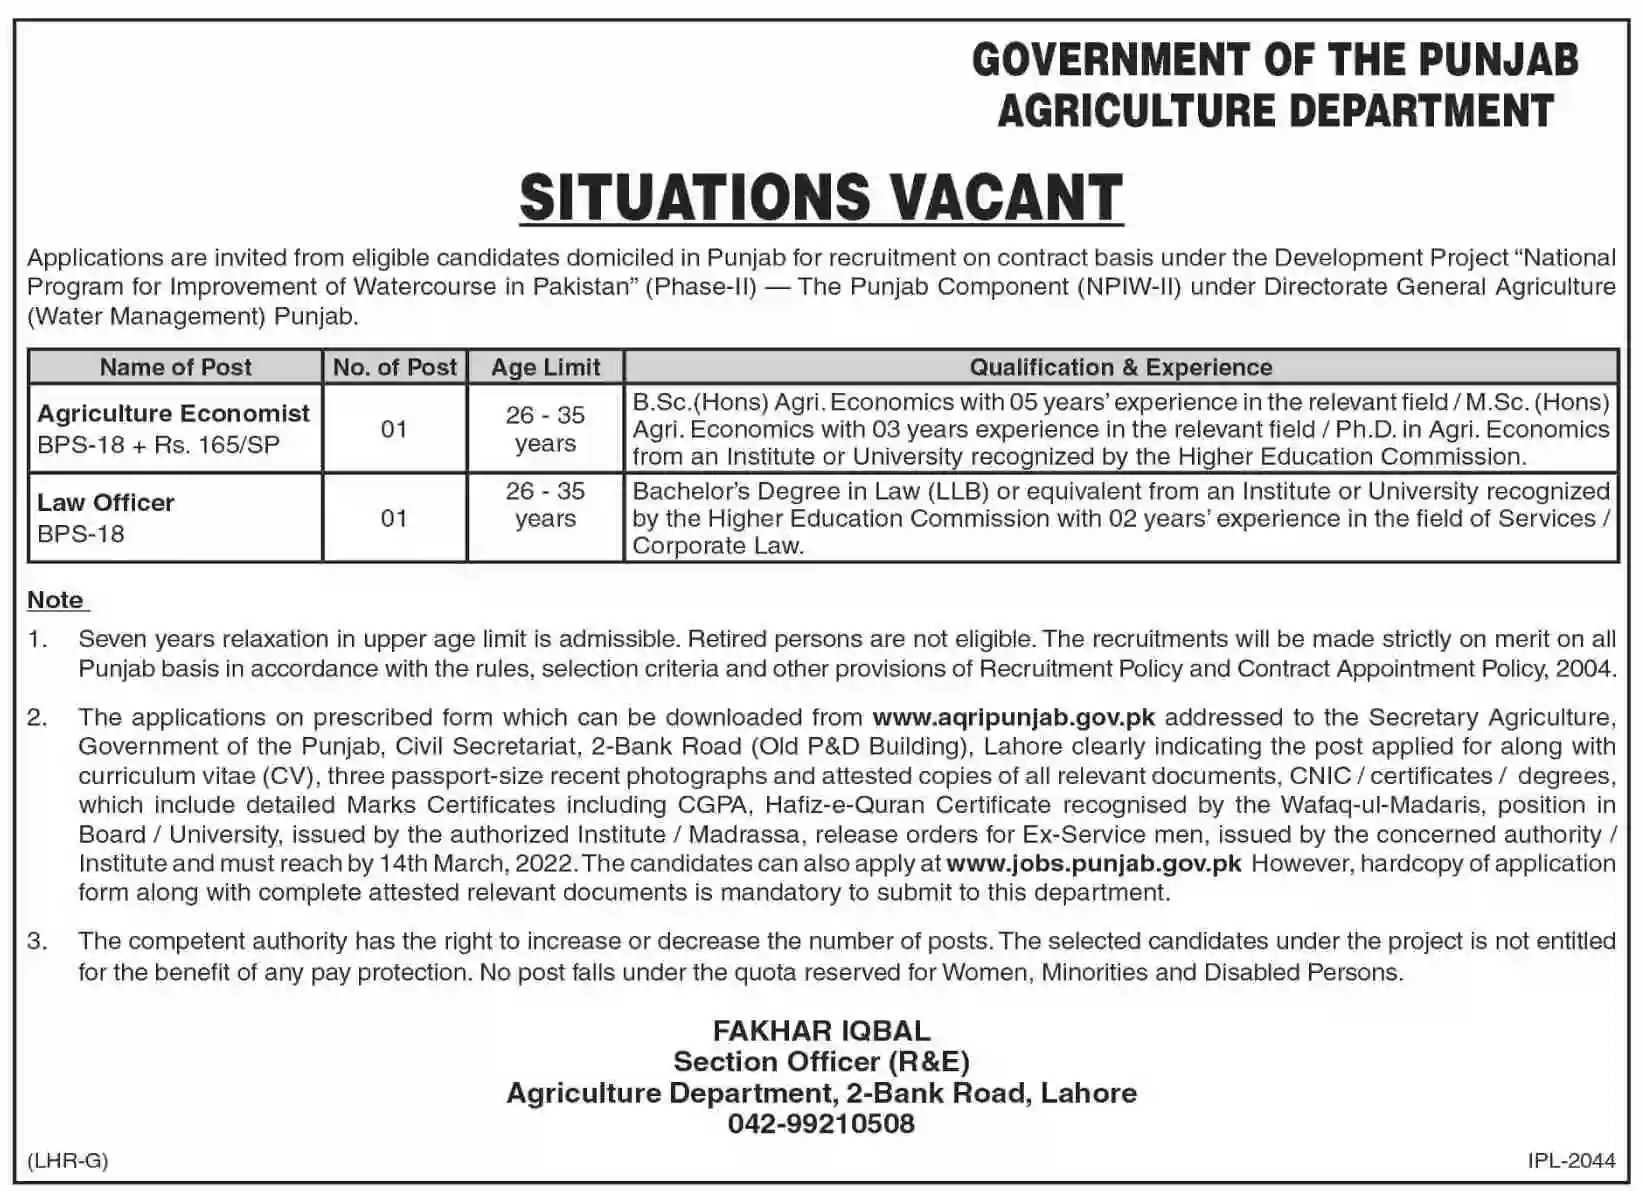 Government of Punjab Agriculture Department Jobs 2022 Latest Advertisement